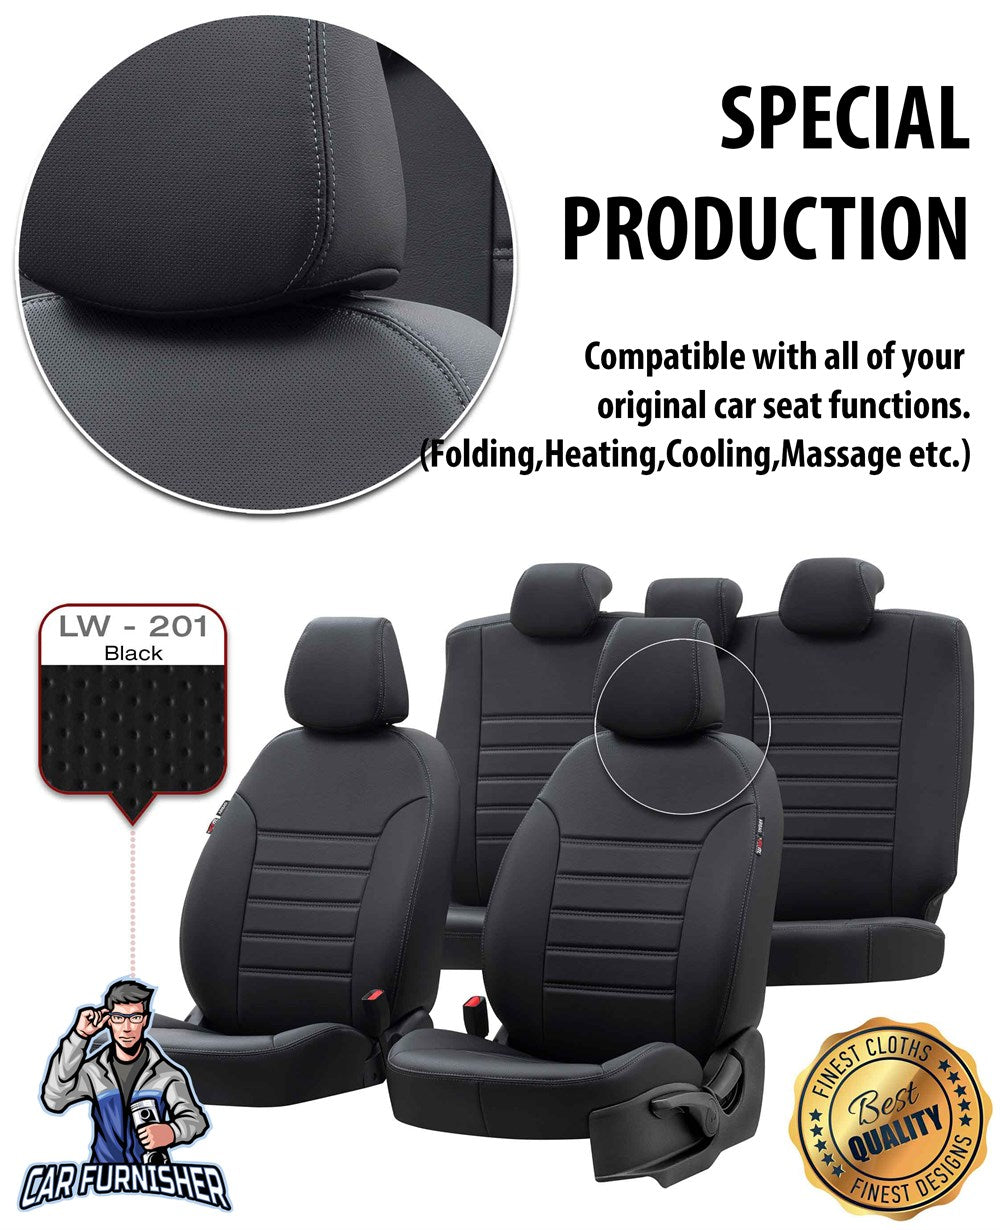 Fiat Stilo Seat Covers Istanbul Leather Design Ivory Leather